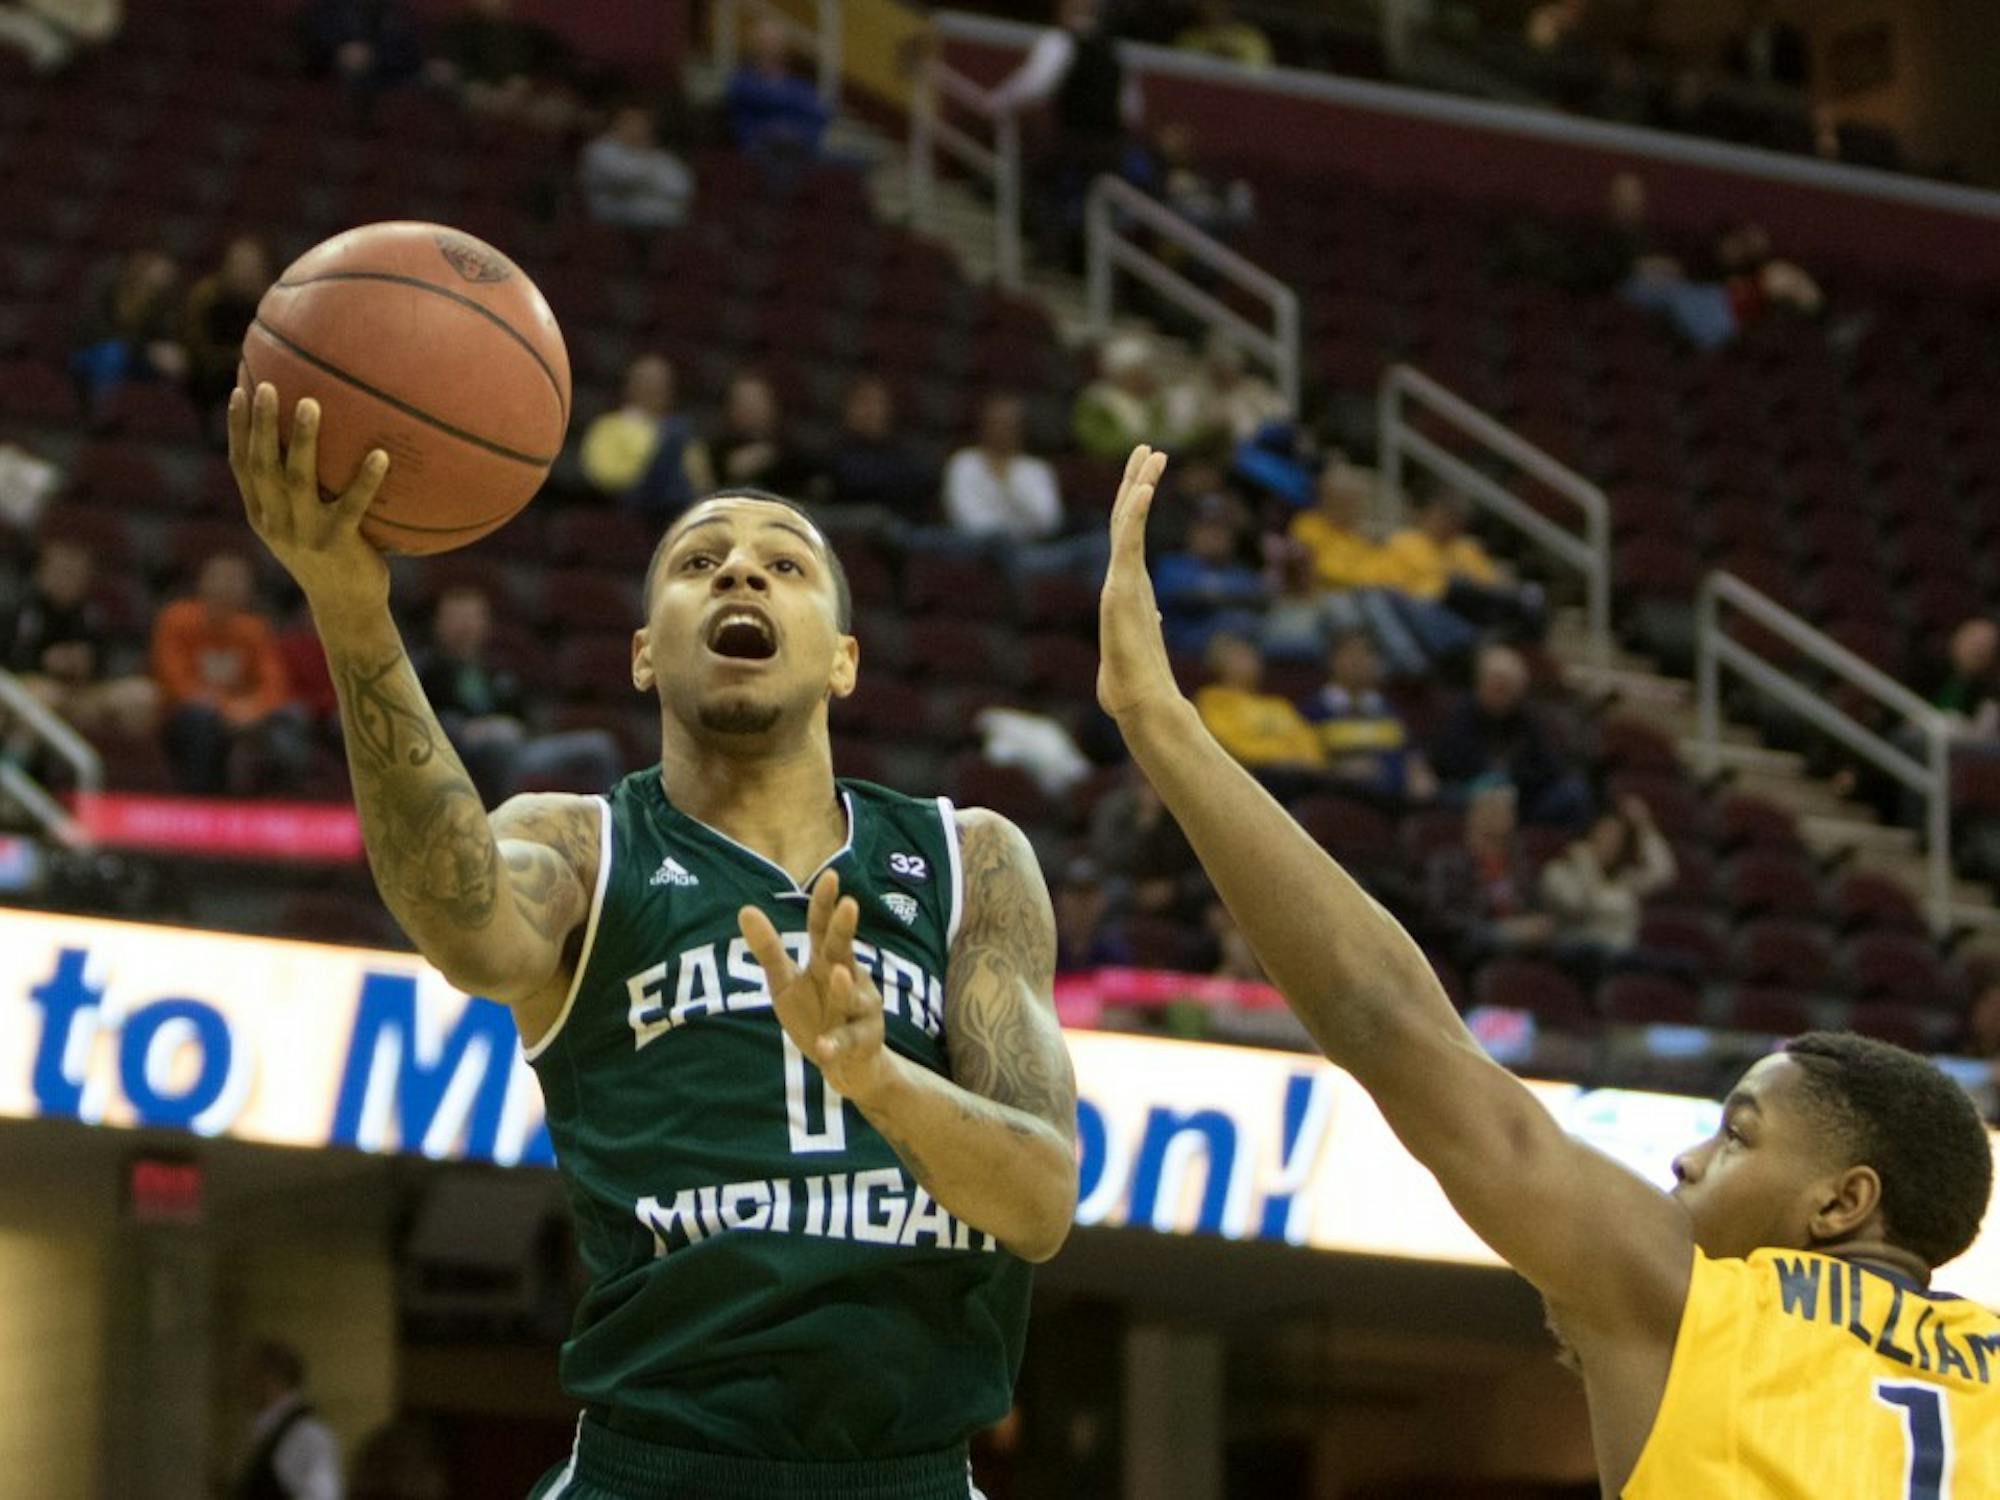 Eastern Michigan guard Ray Lee drives to the basket in the Eagles 78-67 loss to Toledo in the third round of the MAC Tournament in Cleveland, OH on March 12, 2015.